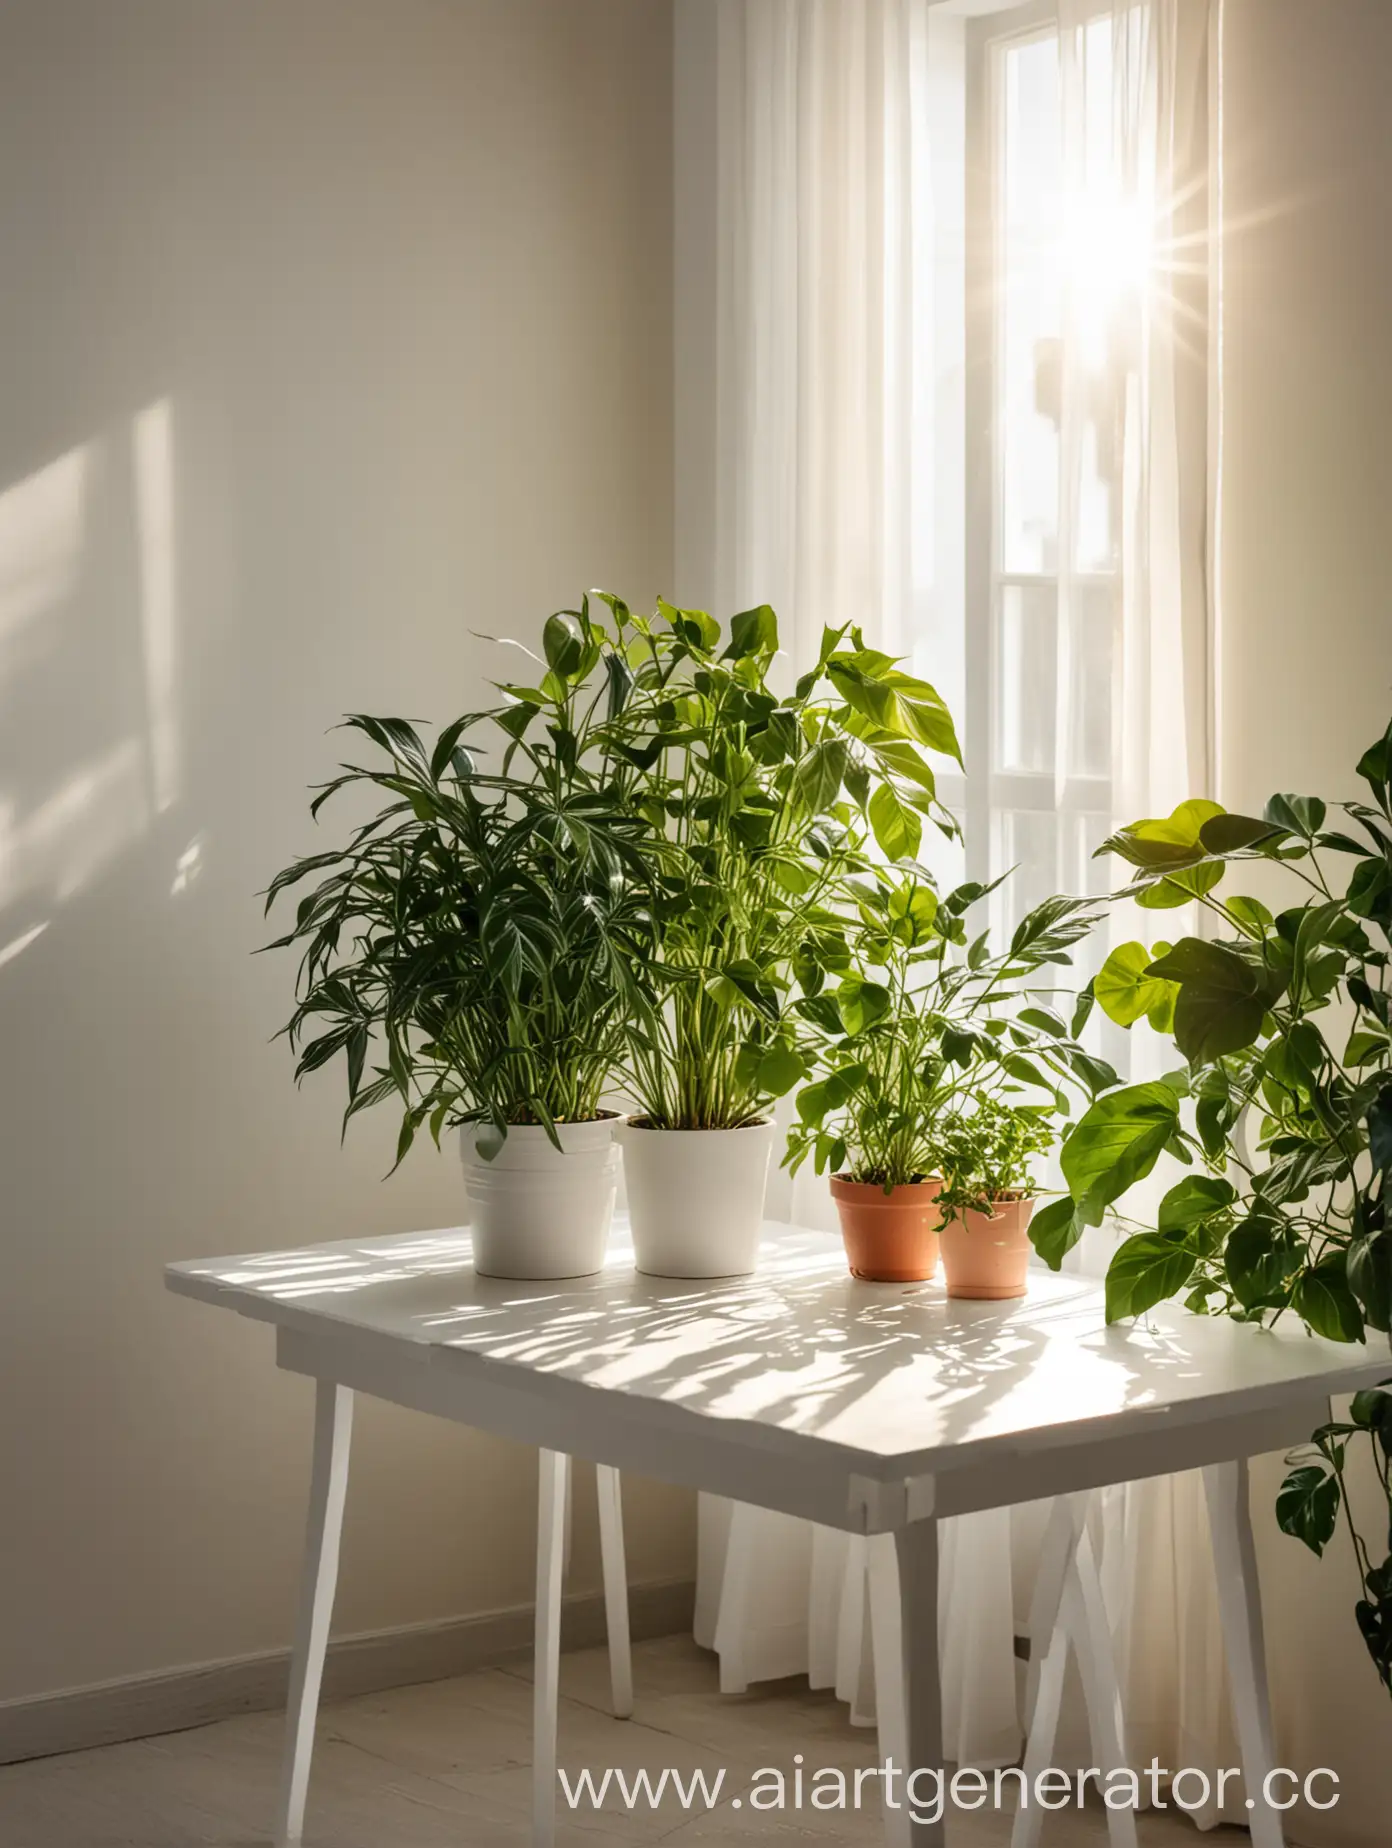 Bright-White-Table-with-Sunlit-Household-Plants